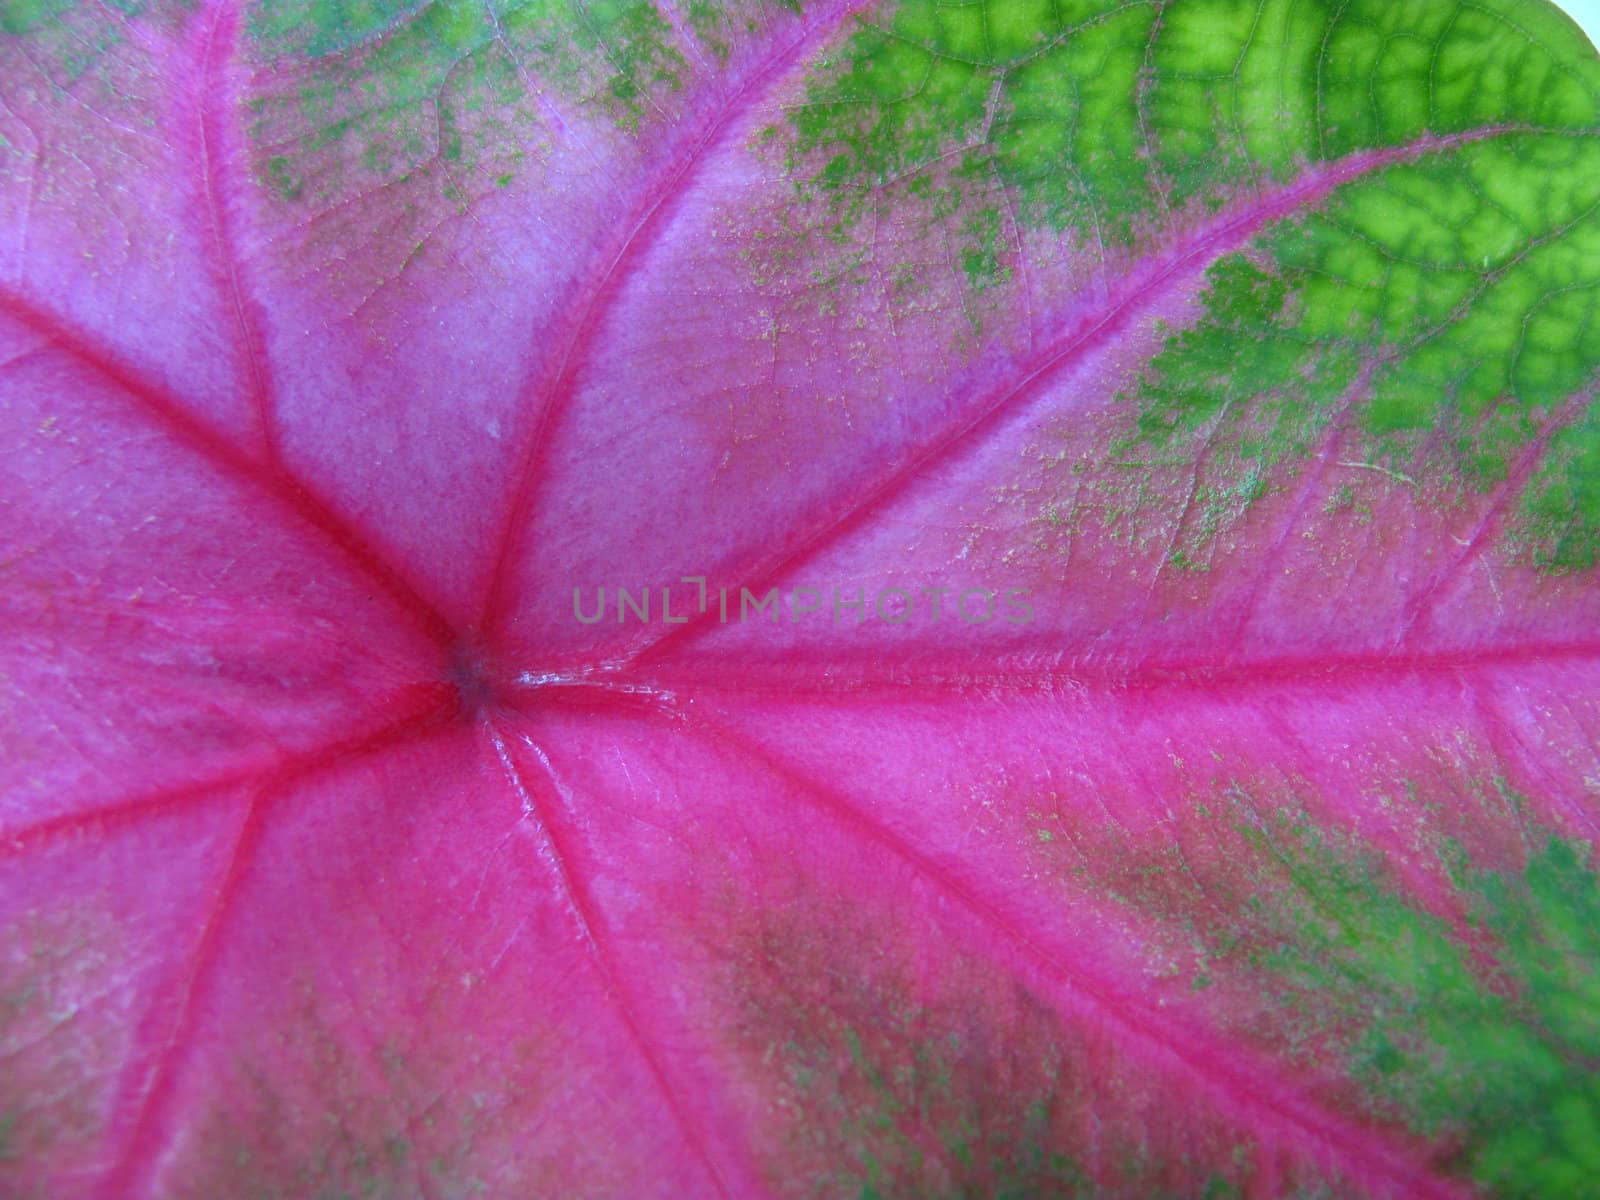 close-up of leaf as a background showing pink veins